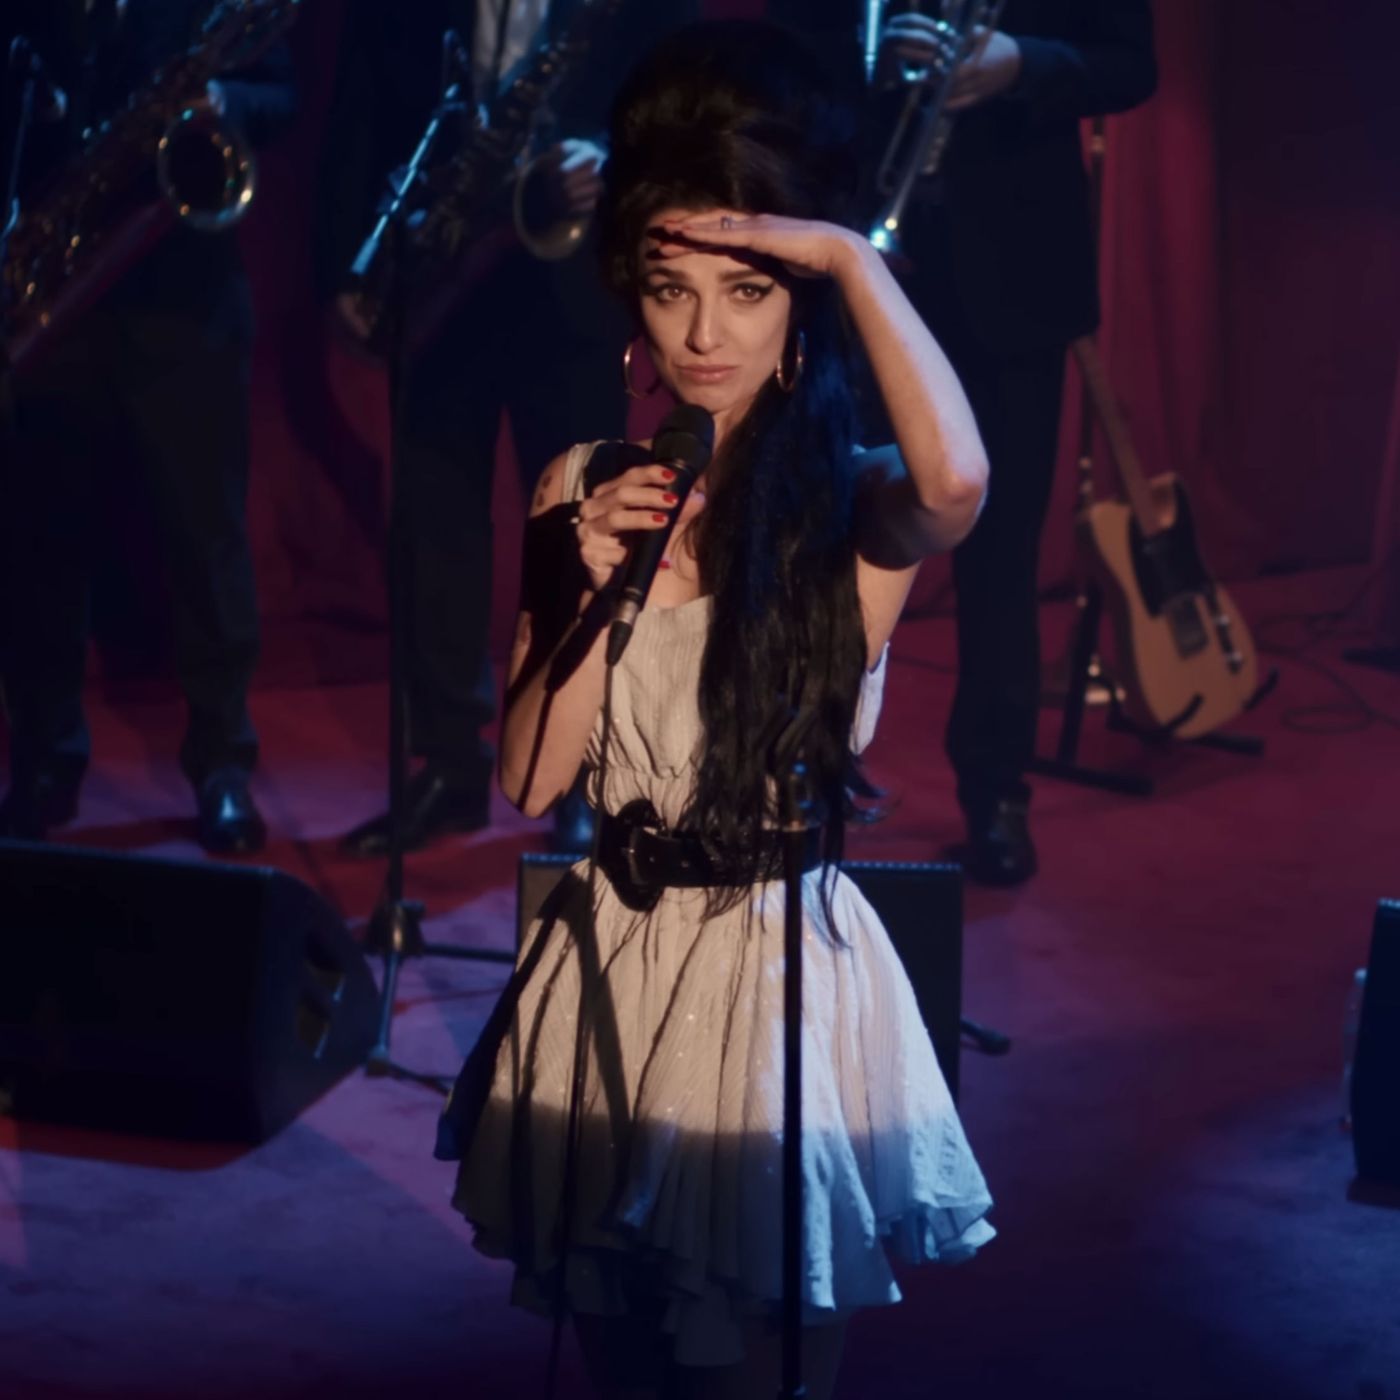 Back to Black: New set photos from Amy Winehouse biopic have people calling  for boycott